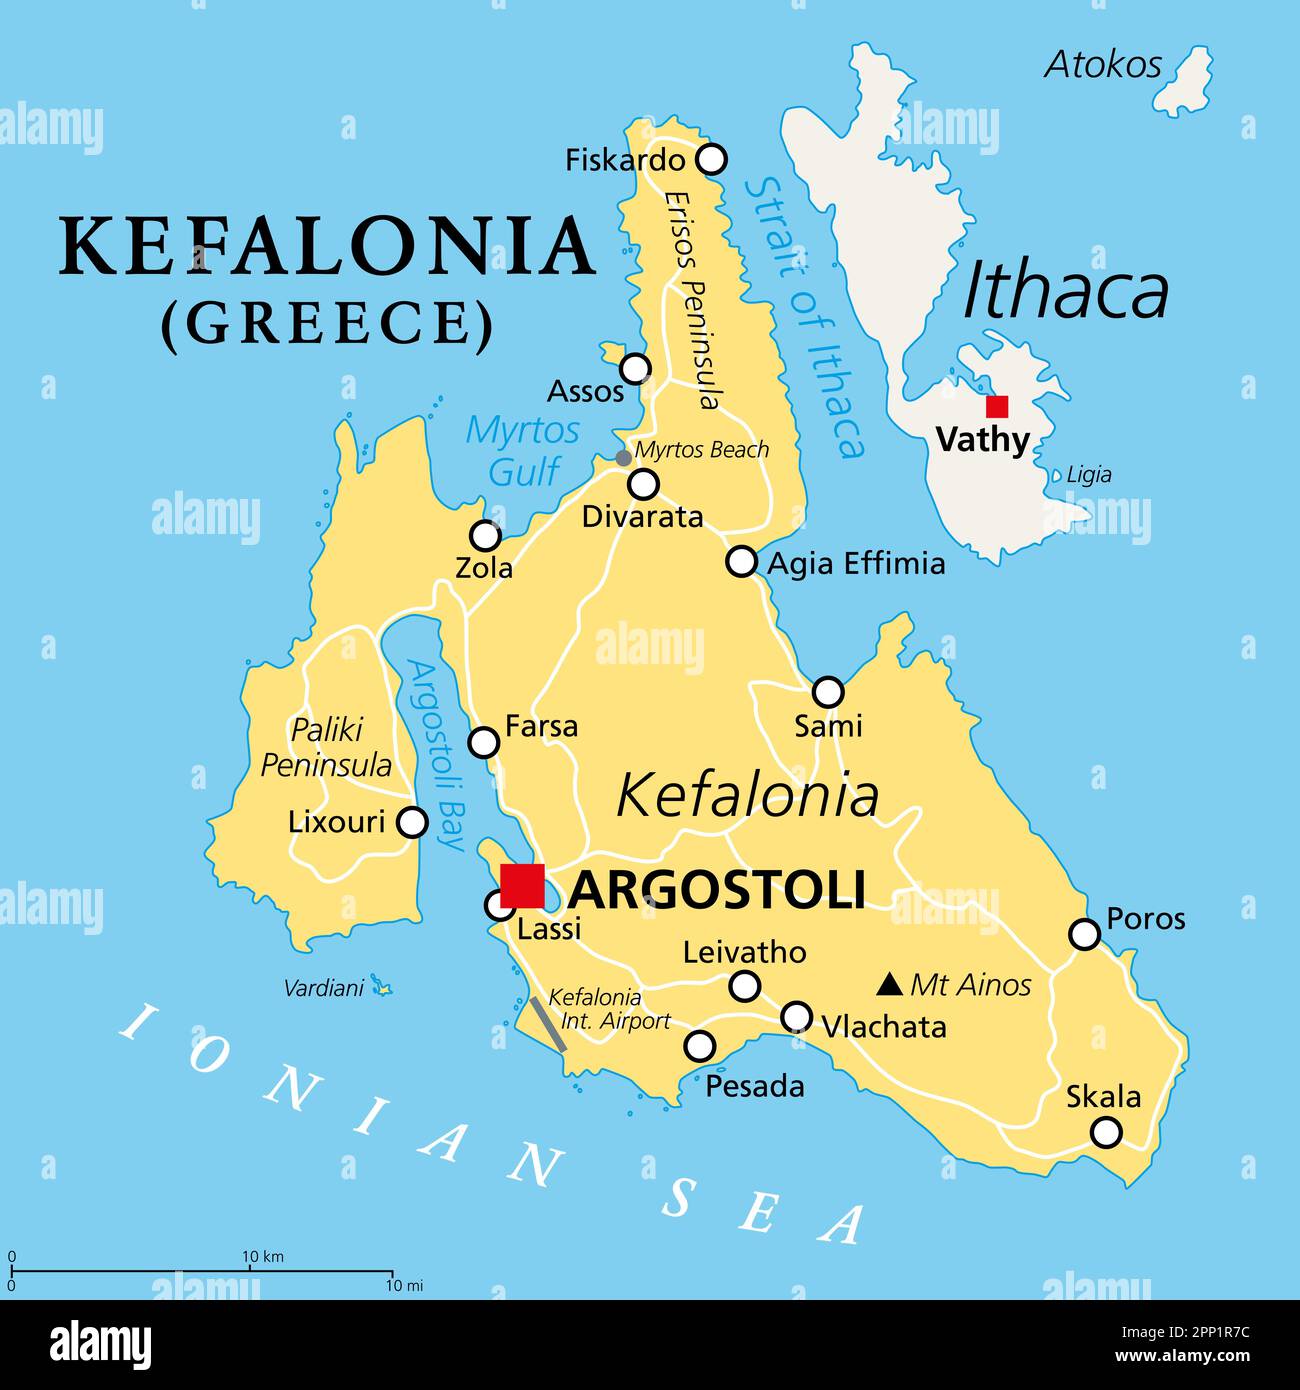 Kefalonia Greek Island Political Map Also Known As Cephalonia Kefallinia Or Kephallenia The Largest Ionian Island Located In Western Greece 2PP1R7C 